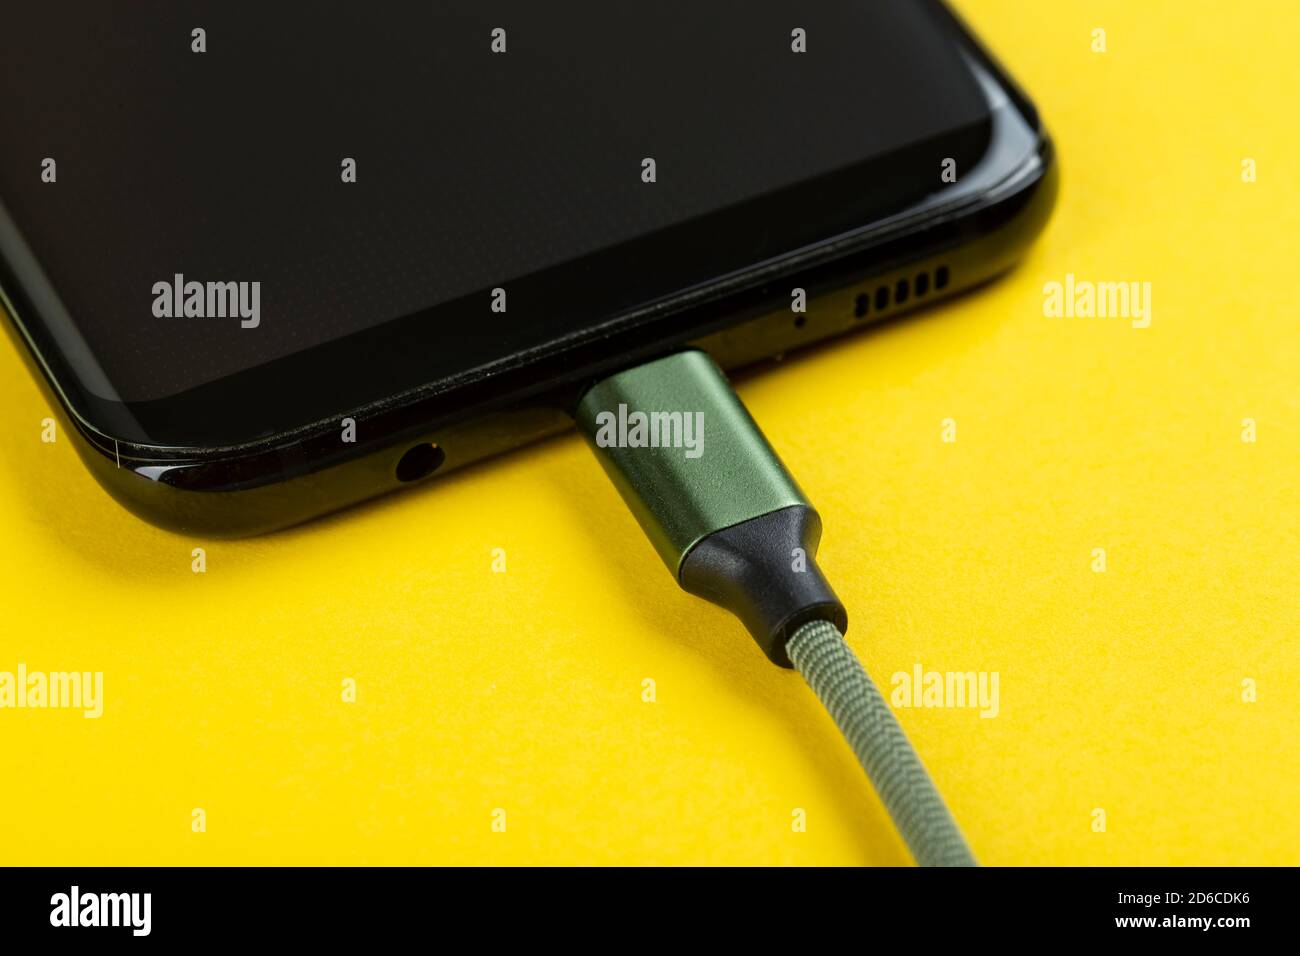 Charging a mobile phone on a yellow background. Stock Photo